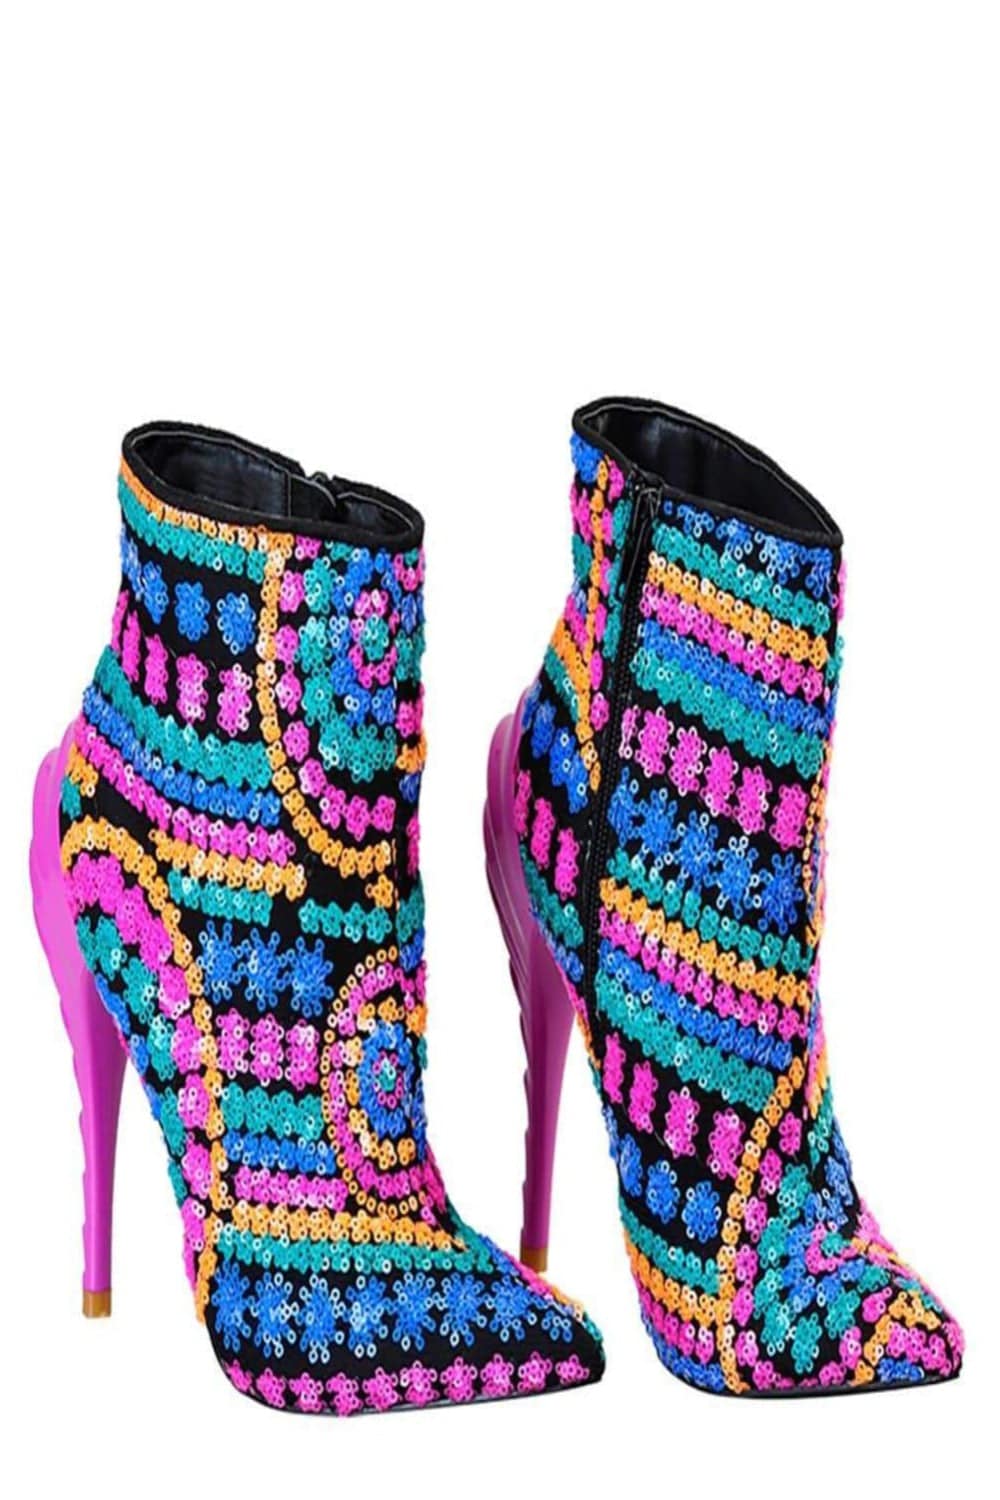 Lady Chick Pink Ankle Boots - TGC Boutique - Ankle Boots